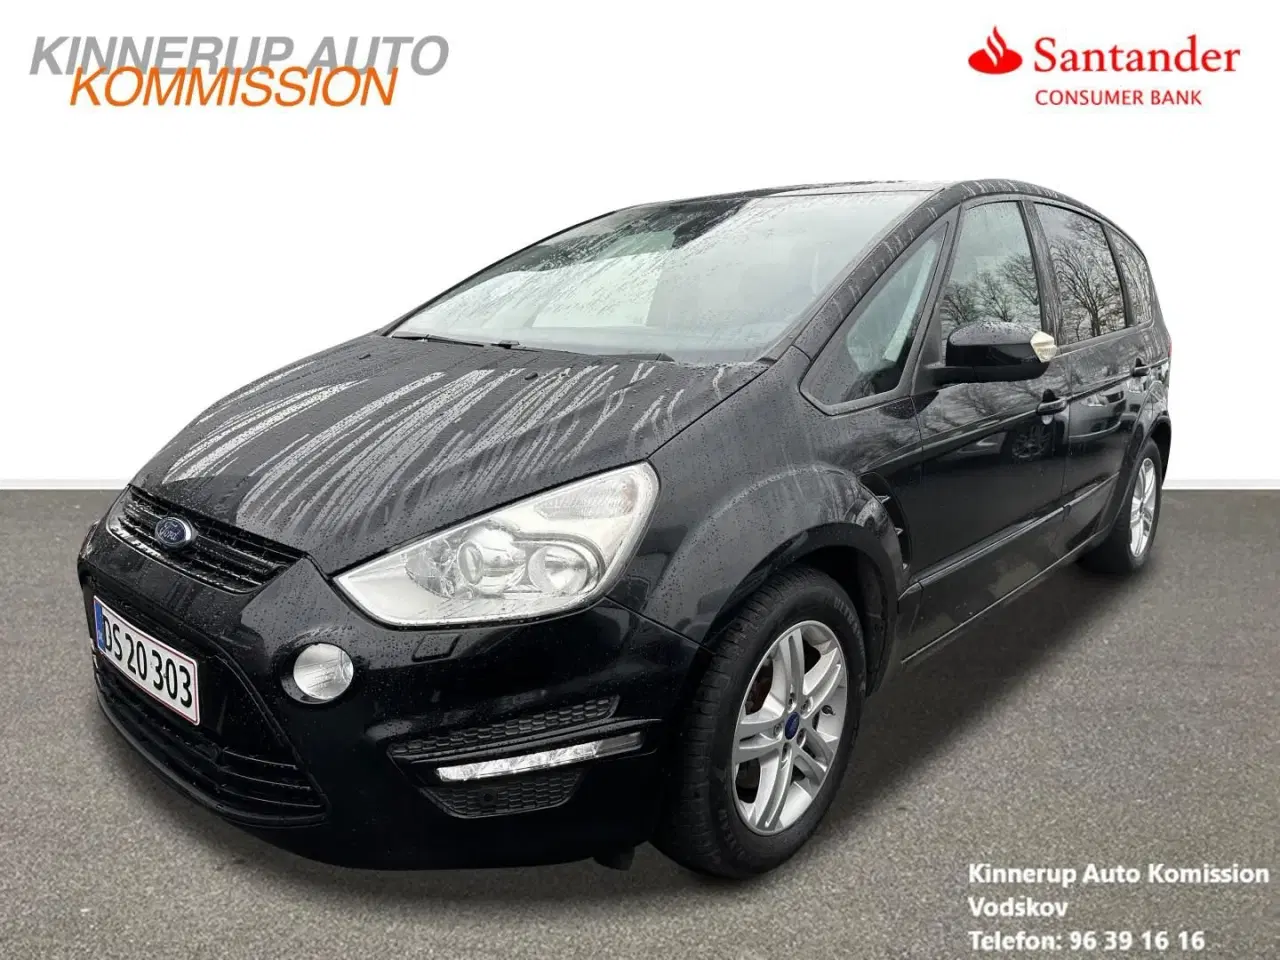 Billede 1 - Ford S-Max 2,0 TDCi Collection Powershift 140HK 6g Aut.